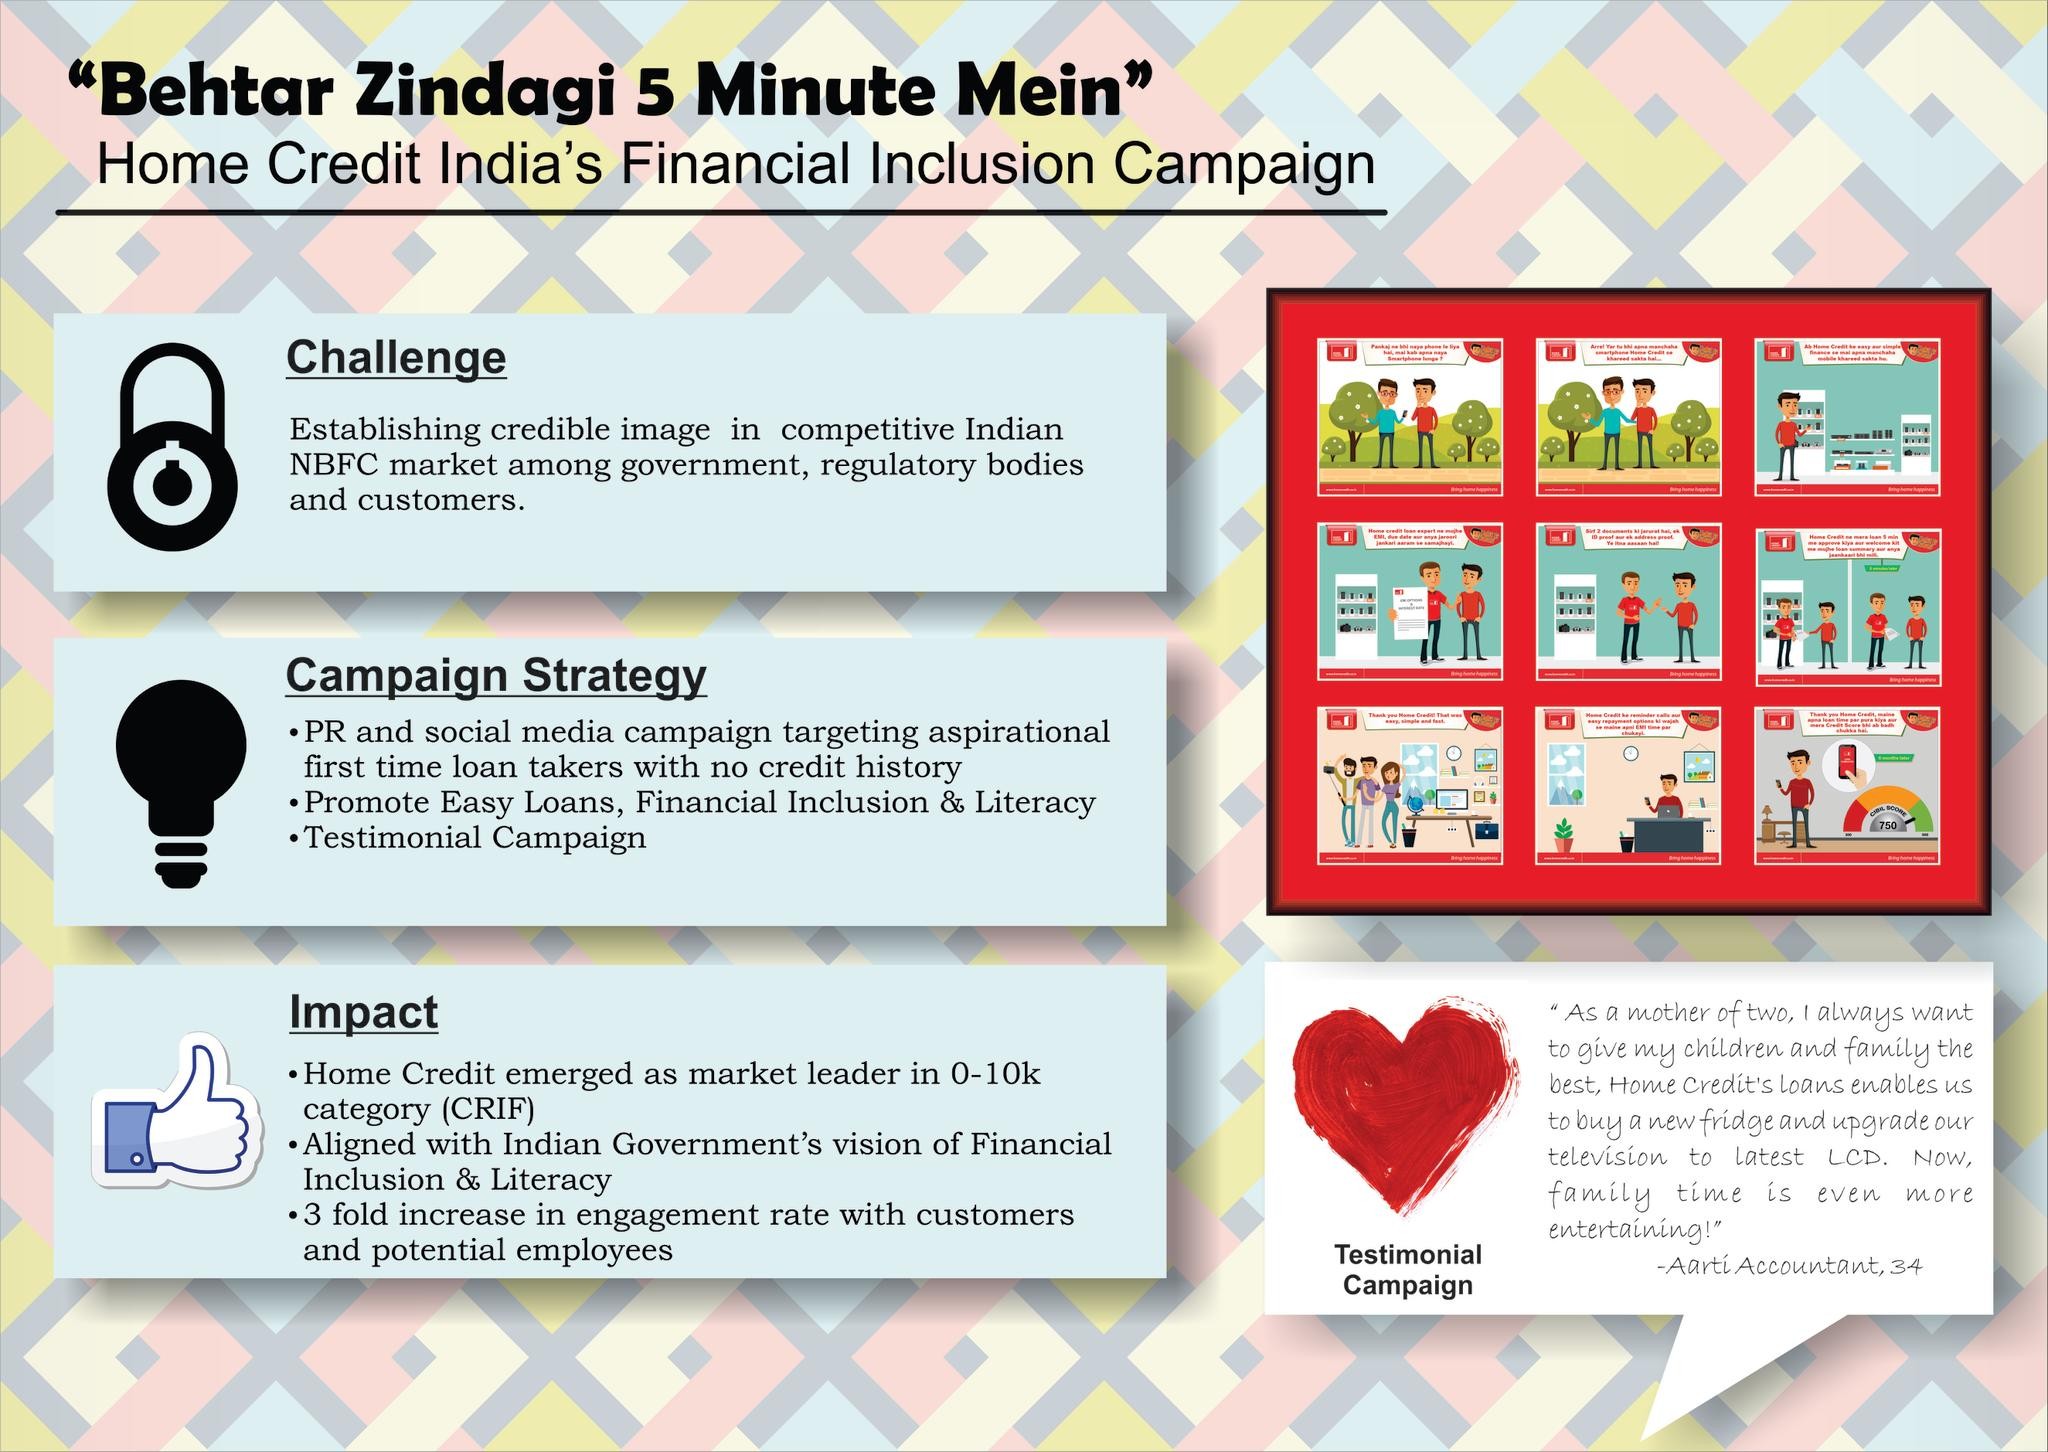 Home Credit India’s Financial Inclusion Campaign “Behtar Zindagi 5 Minute”